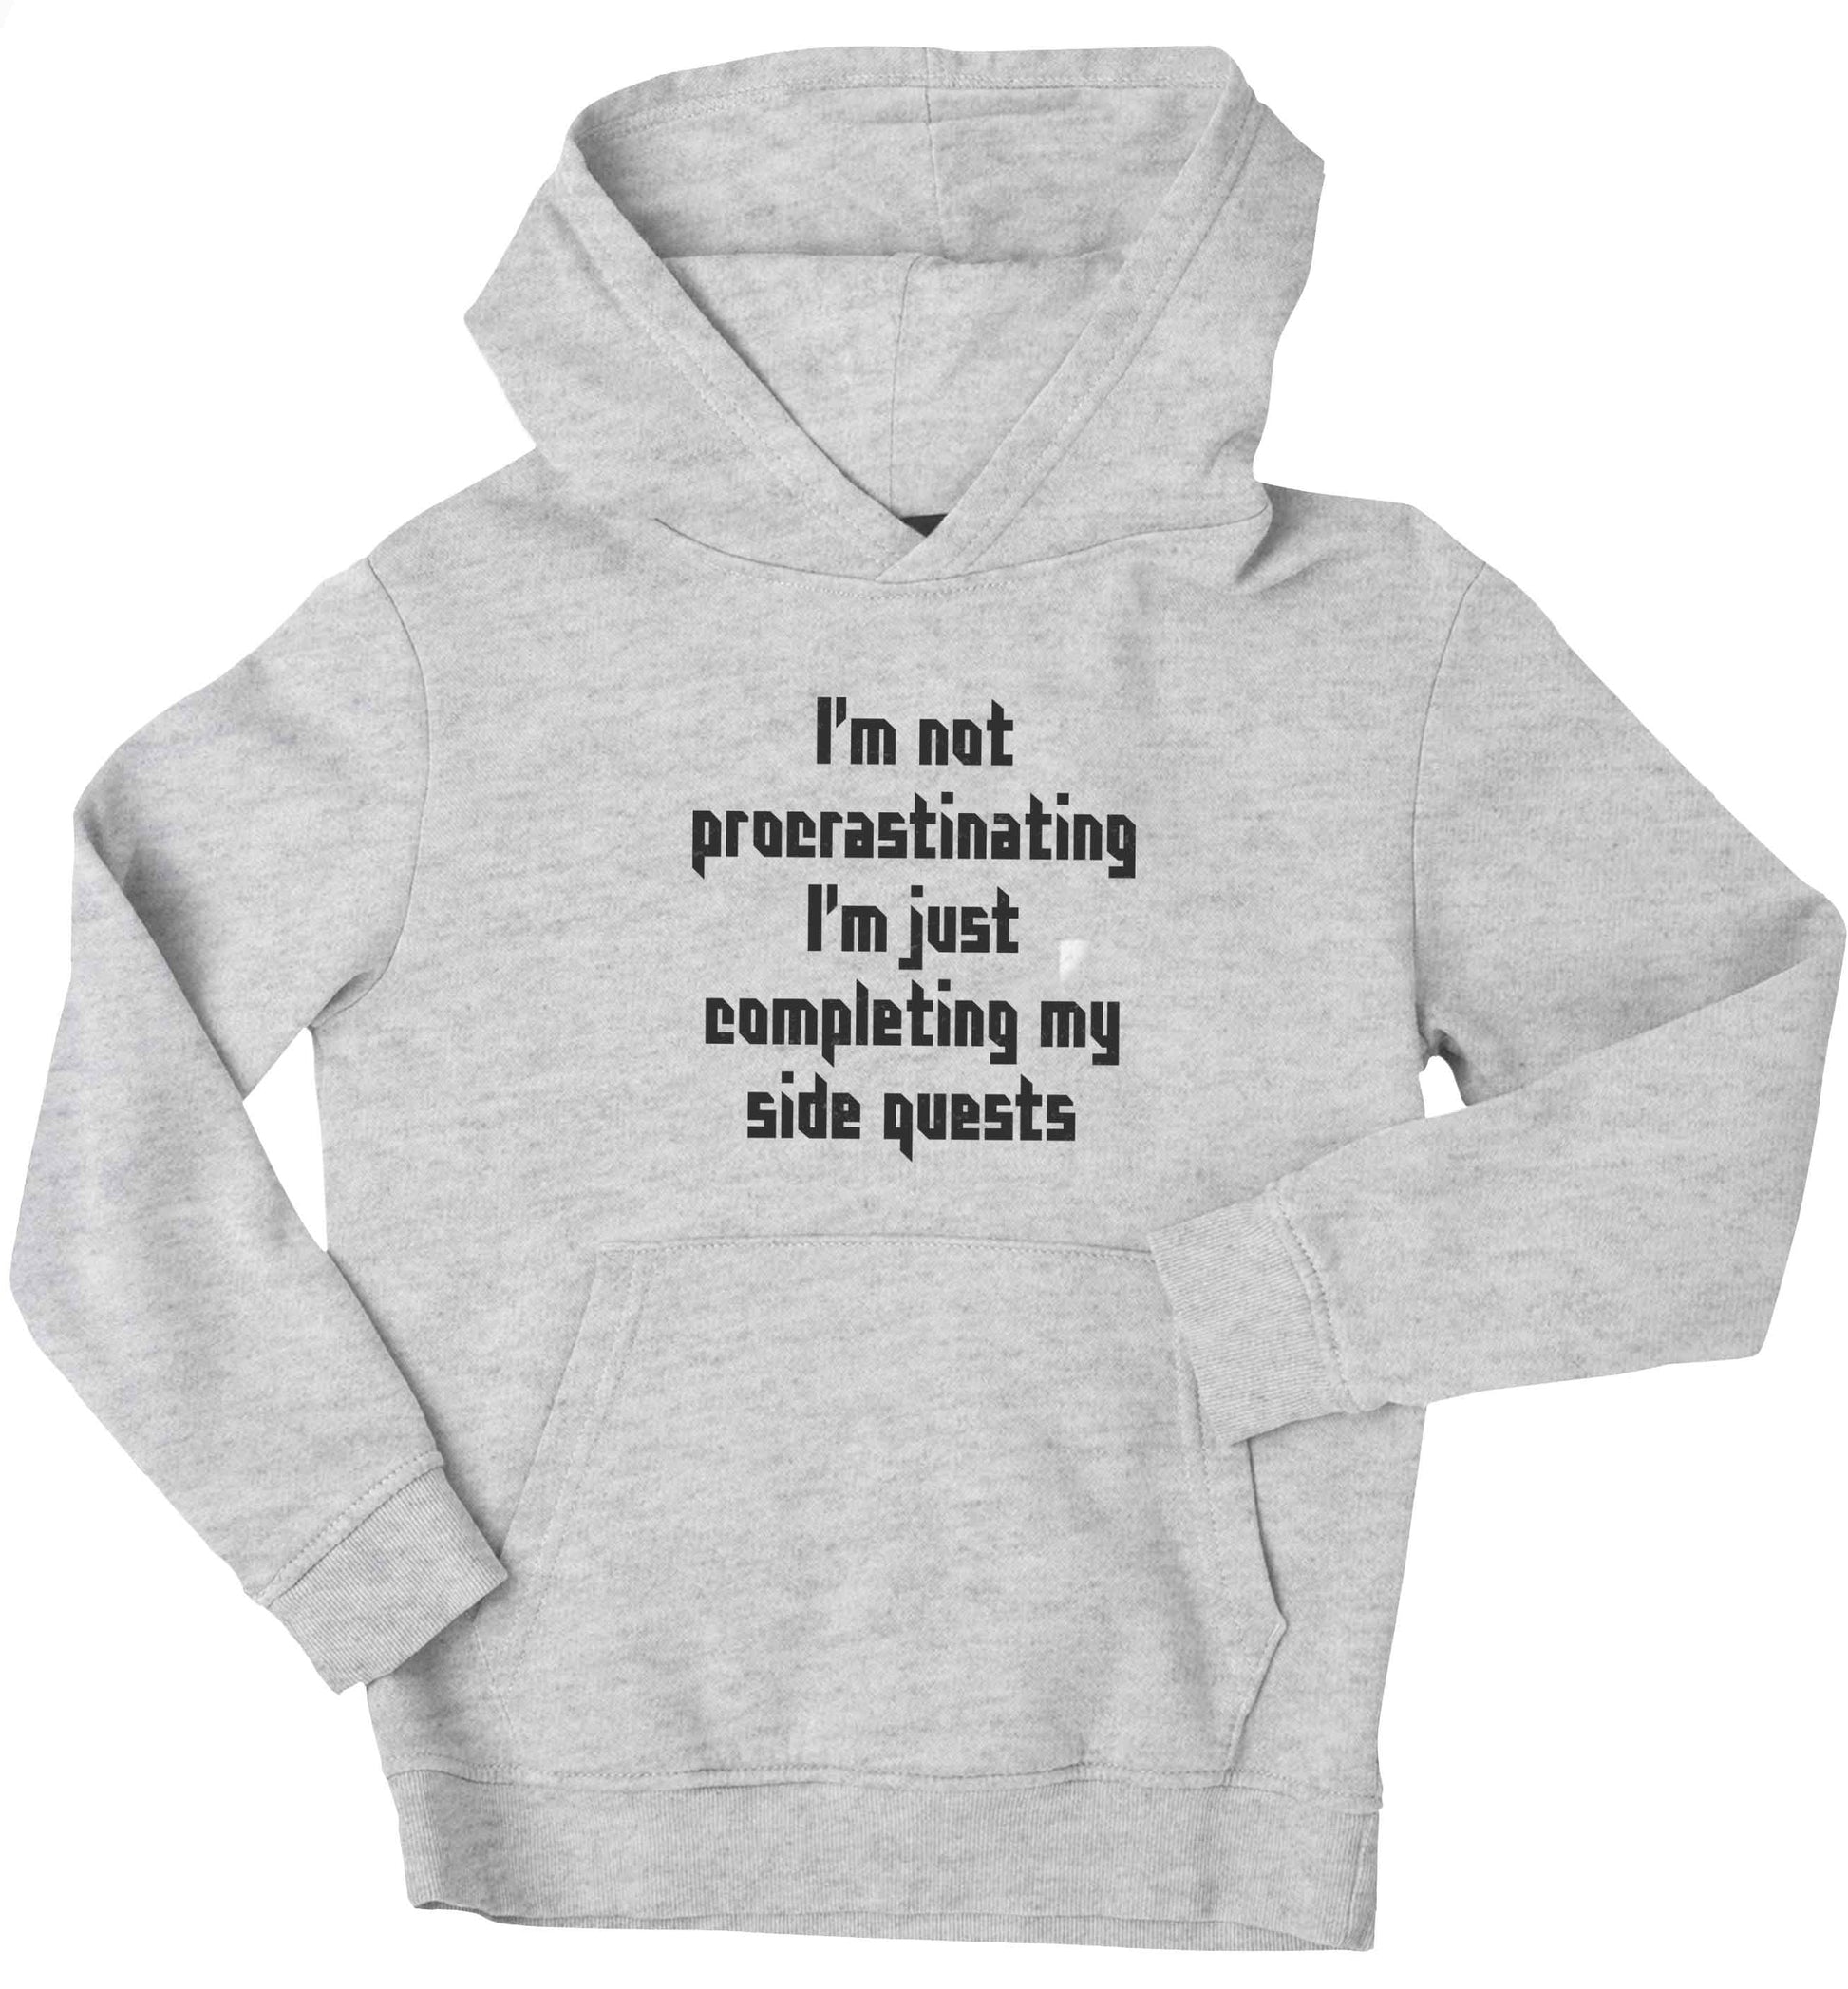 I'm not procrastinating I'm just completing my side quests children's grey hoodie 12-13 Years